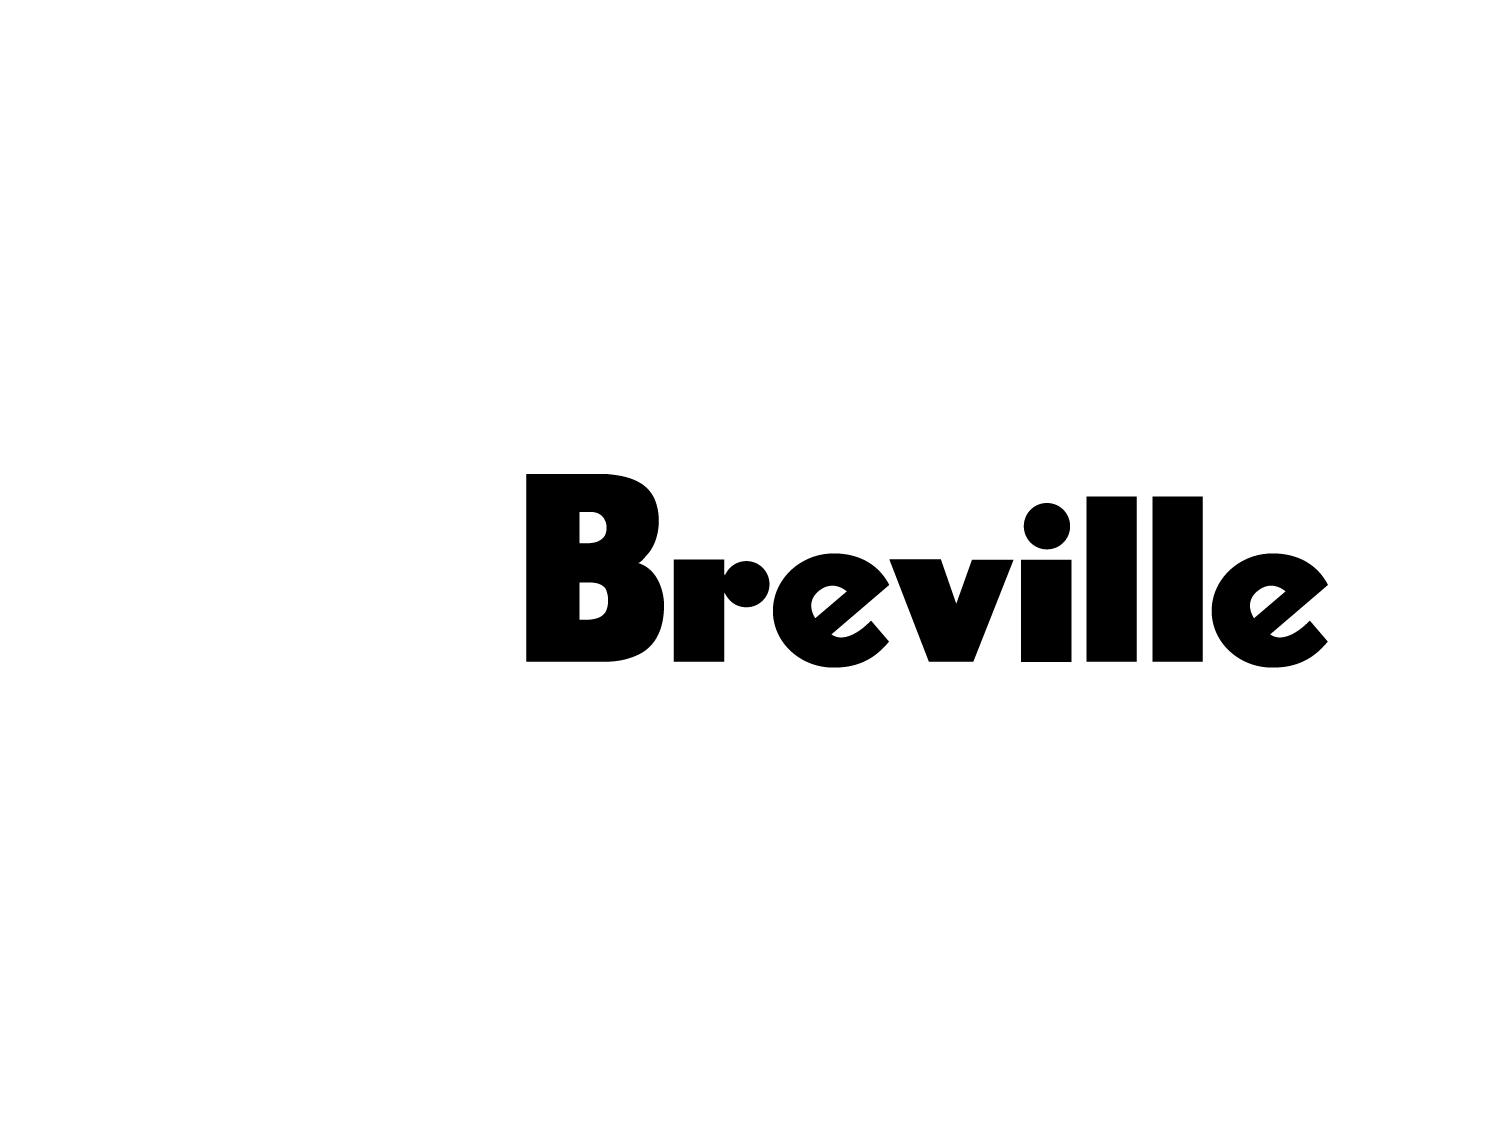 Breville-1500×1125-before-and-after-new